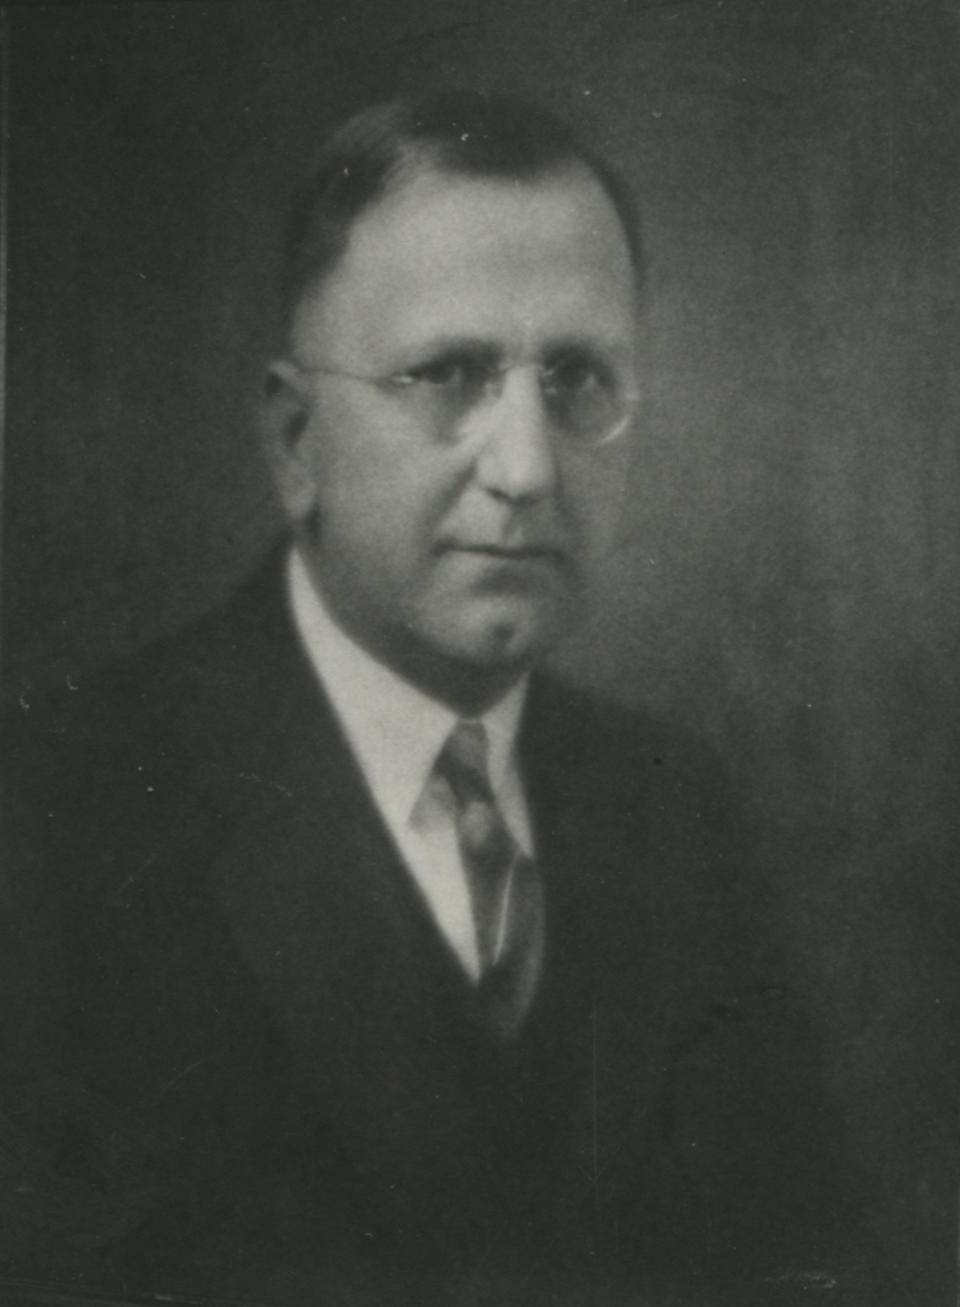 H.L. Bourgeois served as Terrebonne Parish’s public schools superintendent from 1911 through 1955.